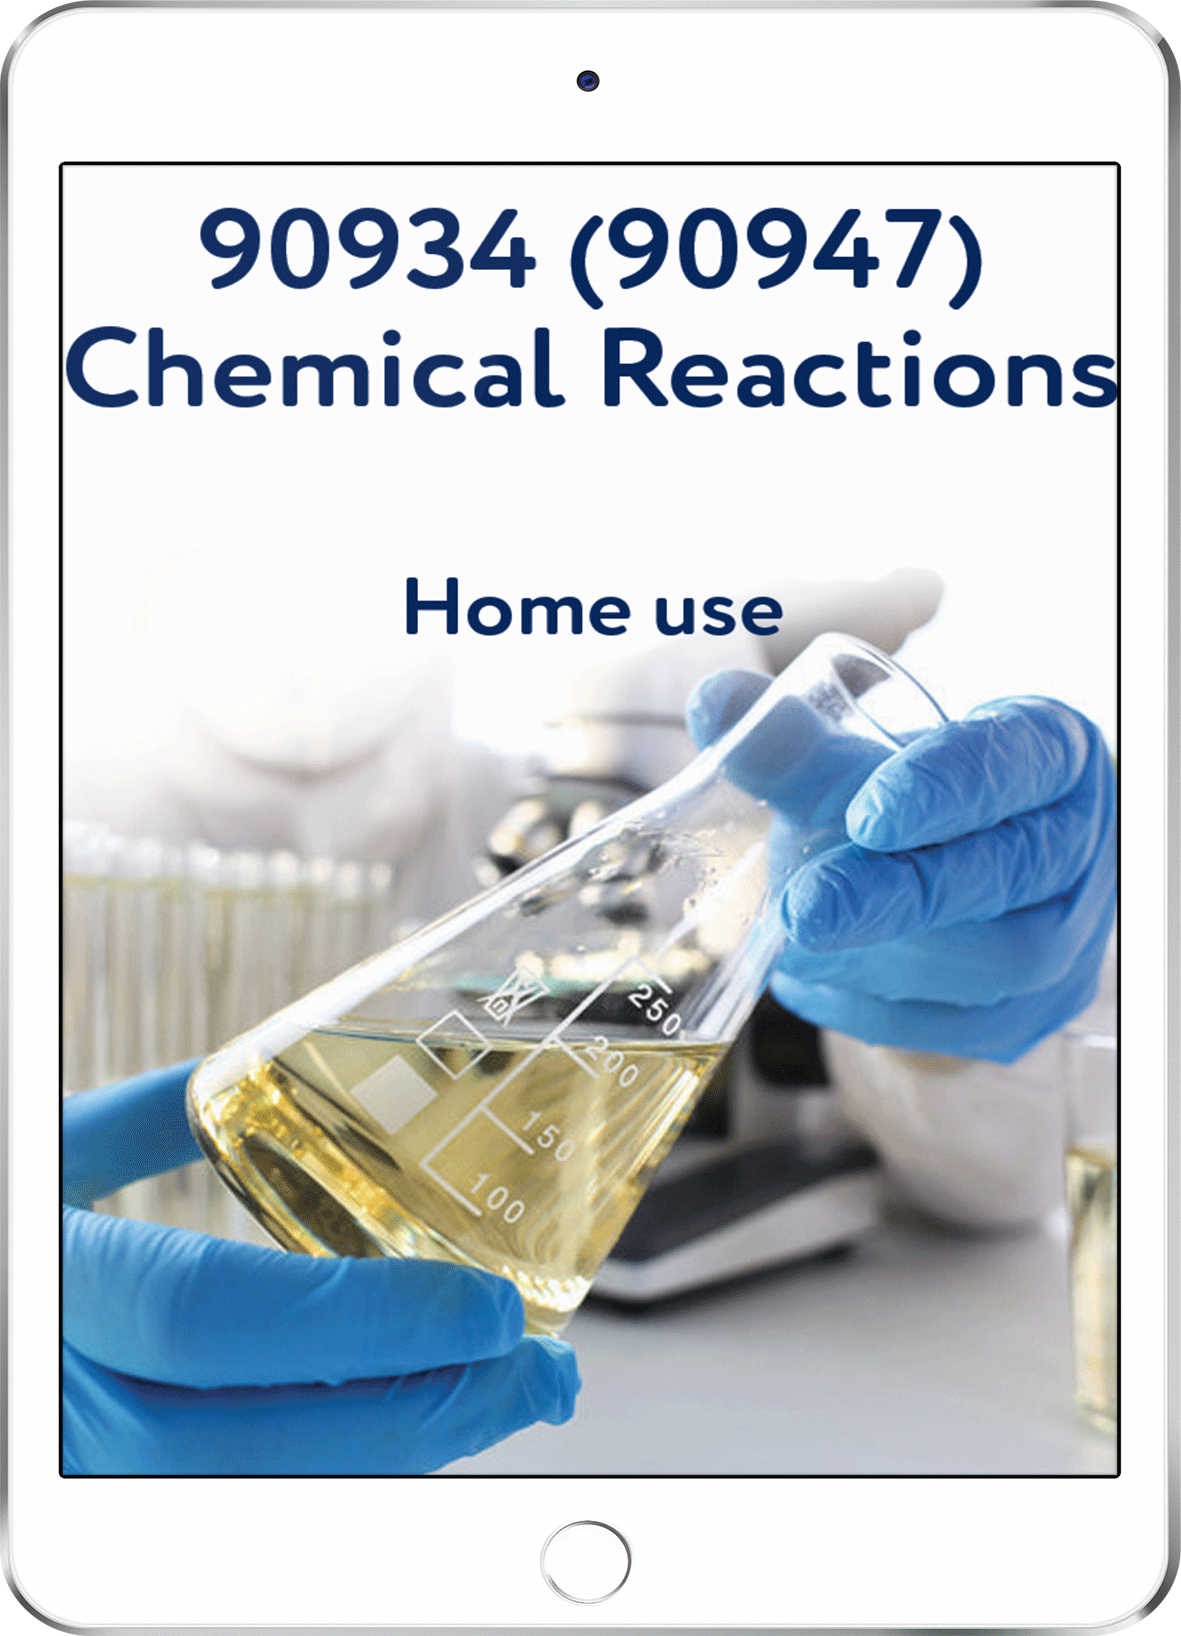 90934 (90947) Chemical Reactions - Home Use